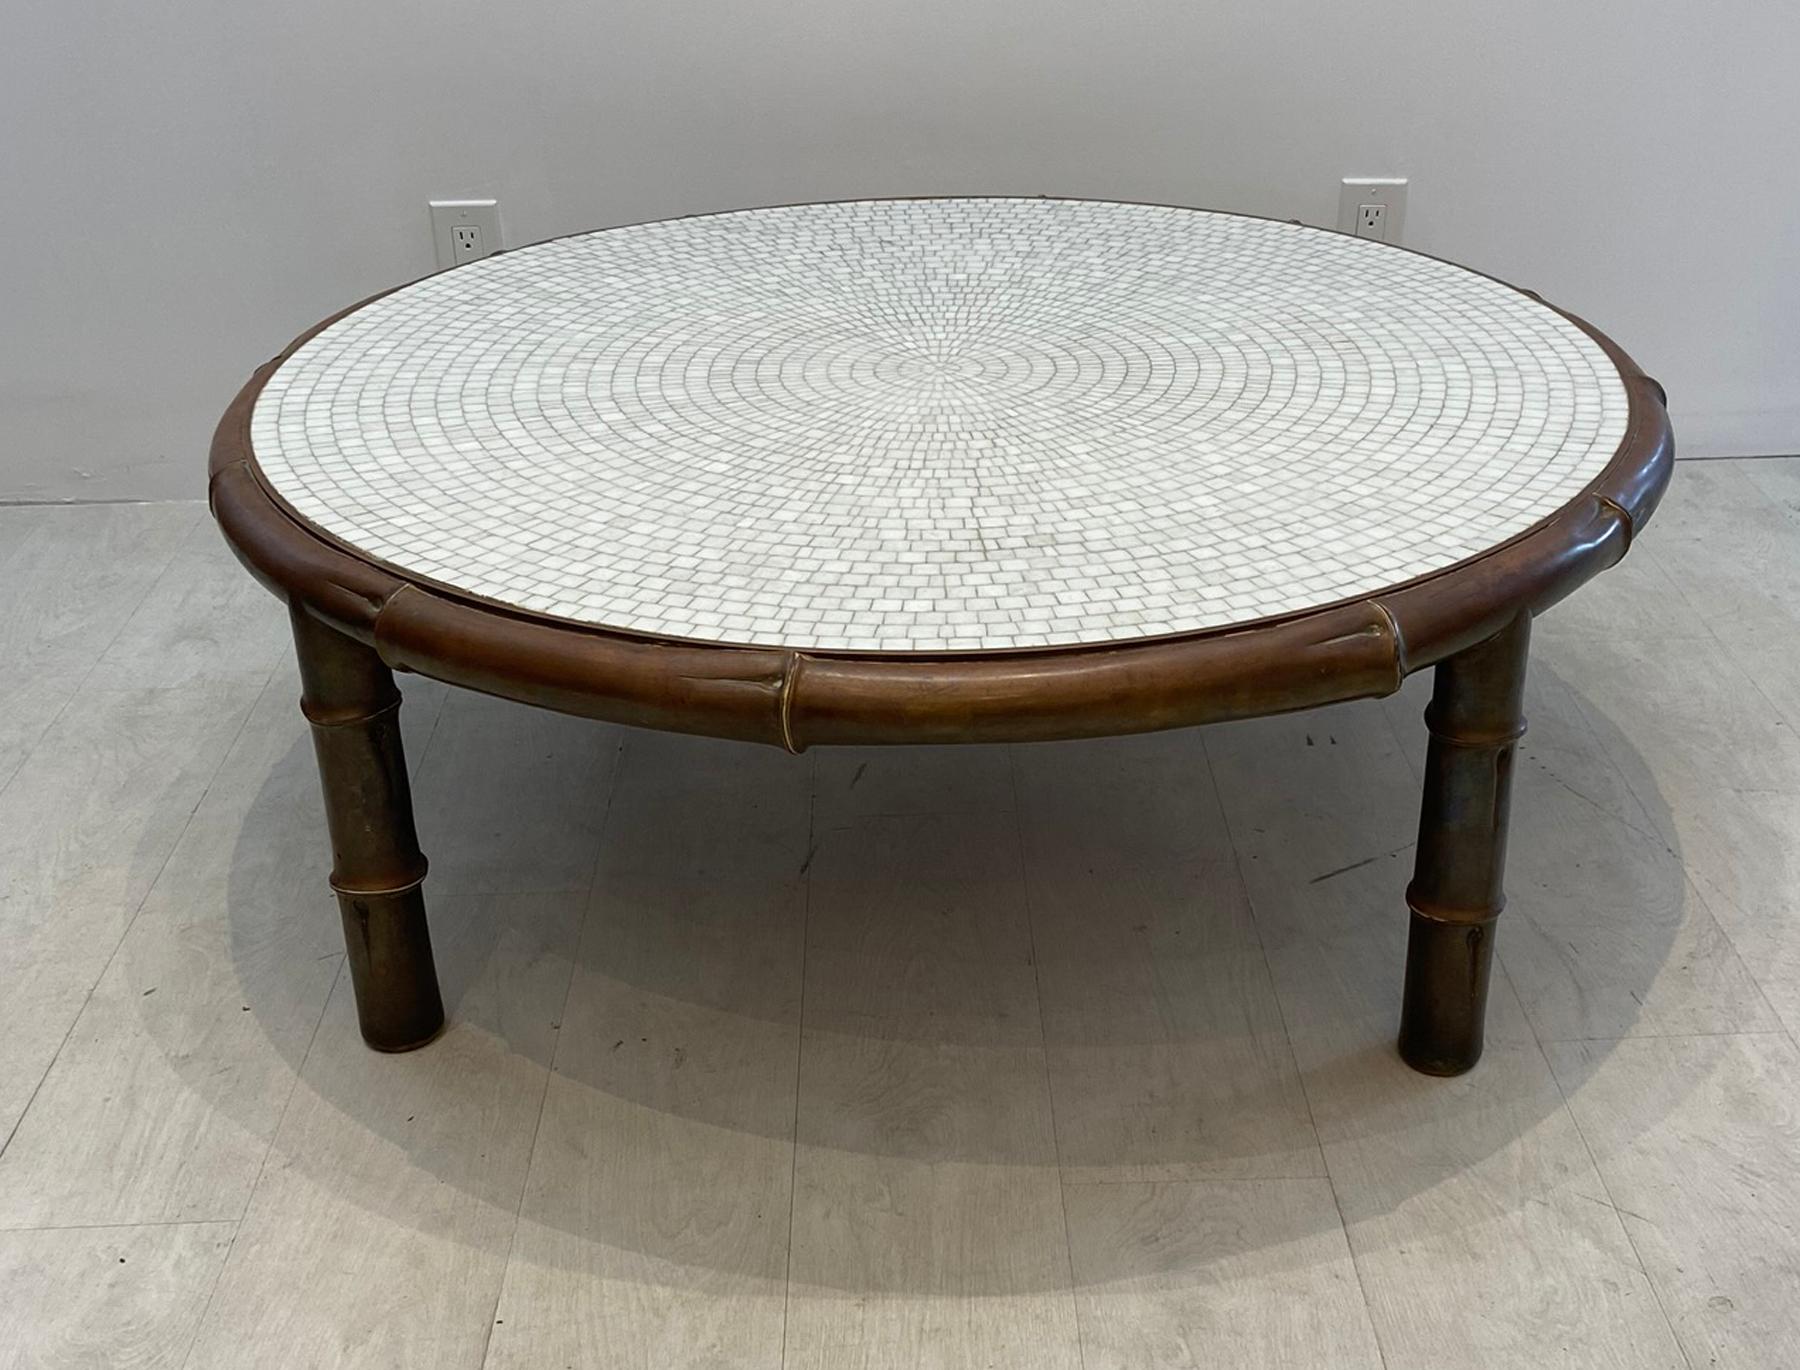 Vintage brass faux bamboo coffee table with inset mosaic Italian glass top. This table has a great look to it very well made fairly unique piece of furniture.